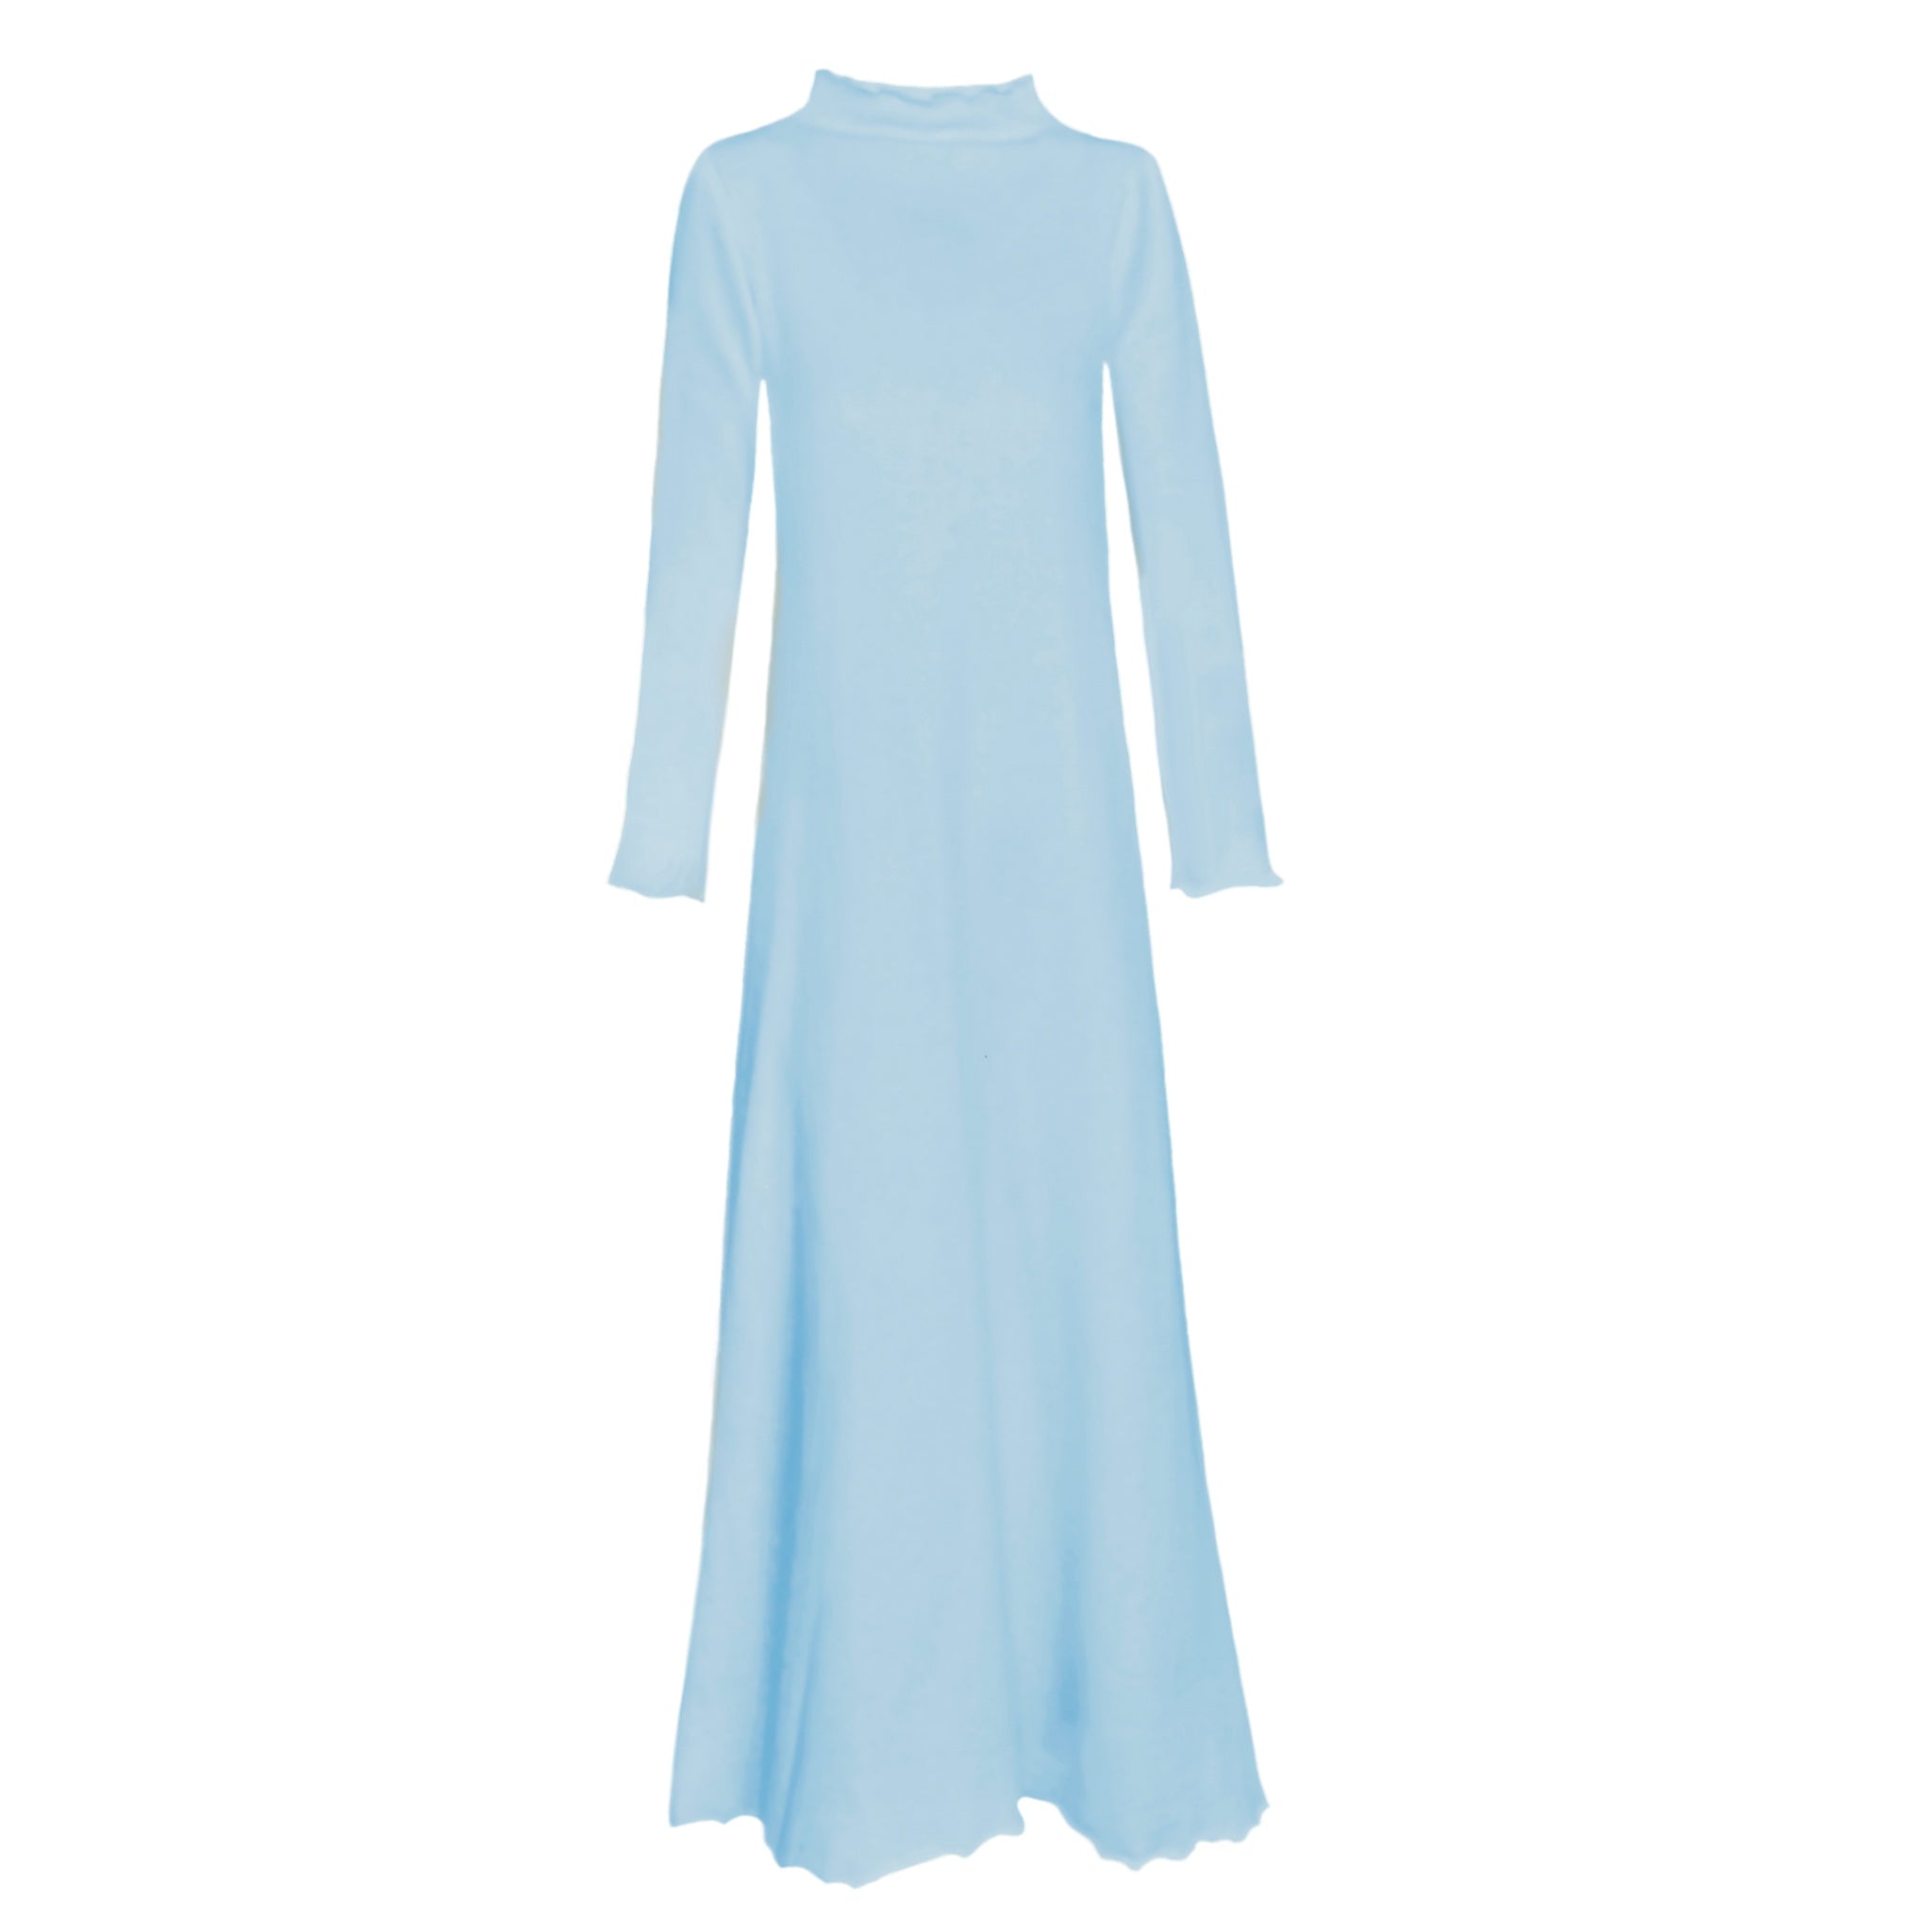 Women's Lounge Dress in Winter Blue French Terry by Casey Marks